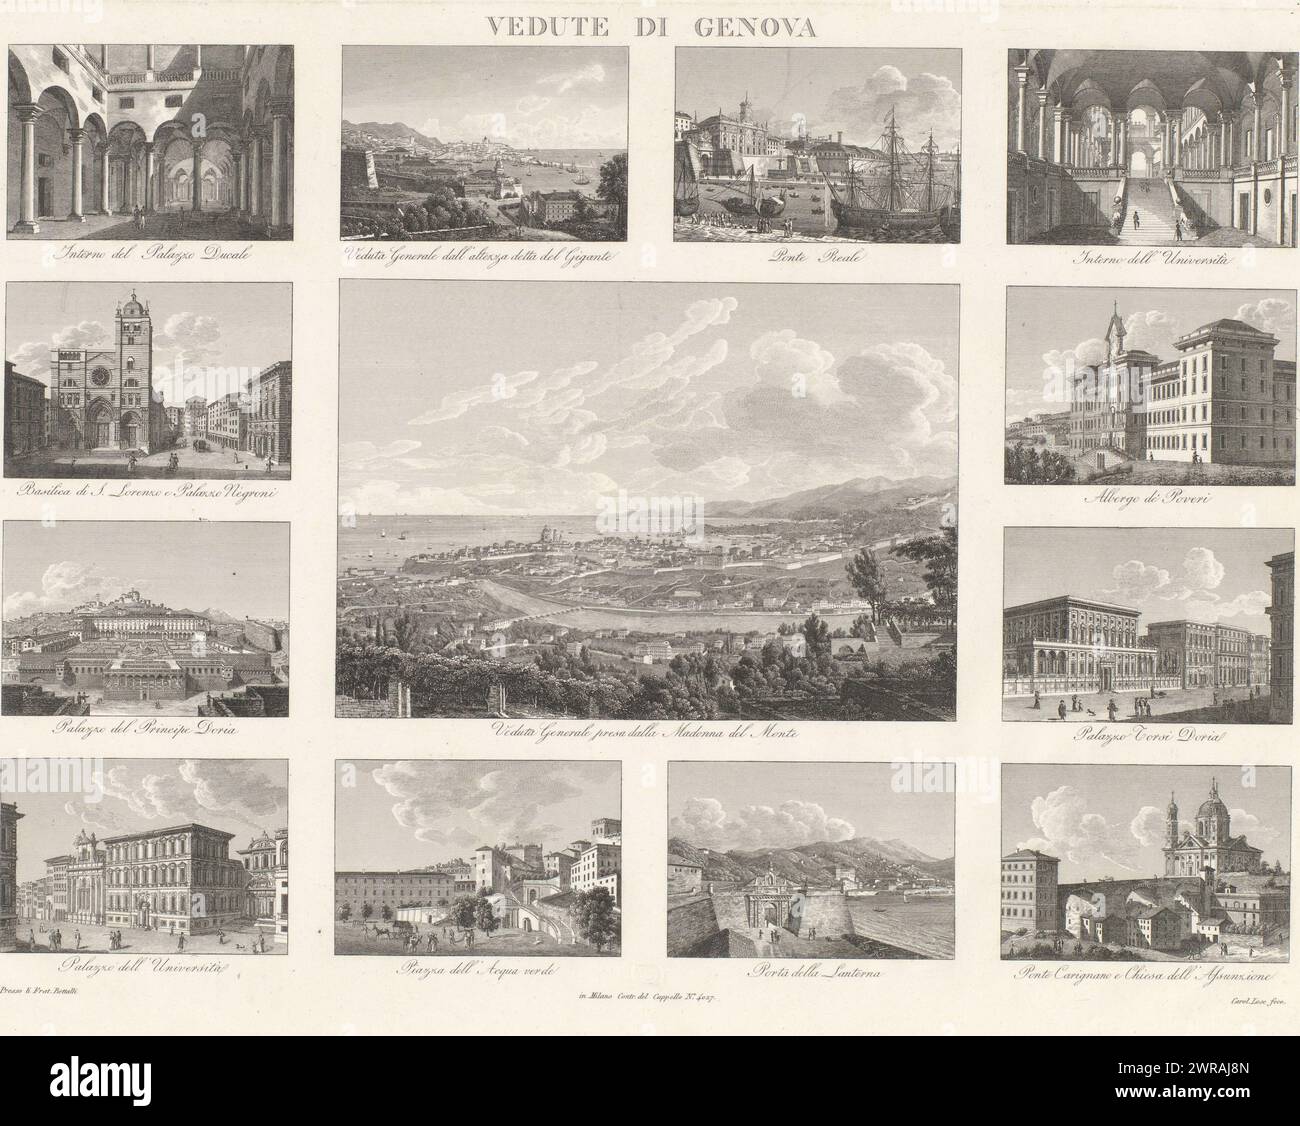 View of Genoa, Vedute di Genova (title on object), Text in Italian in the margins. Thirteen performances from well-known locations in and around Genoa., print maker: Caroline Lose, publisher: Fratelli Bettalli, Milaan, 1794 - 1830, paper, engraving, height 334 mm × width 444 mm, print Stock Photo